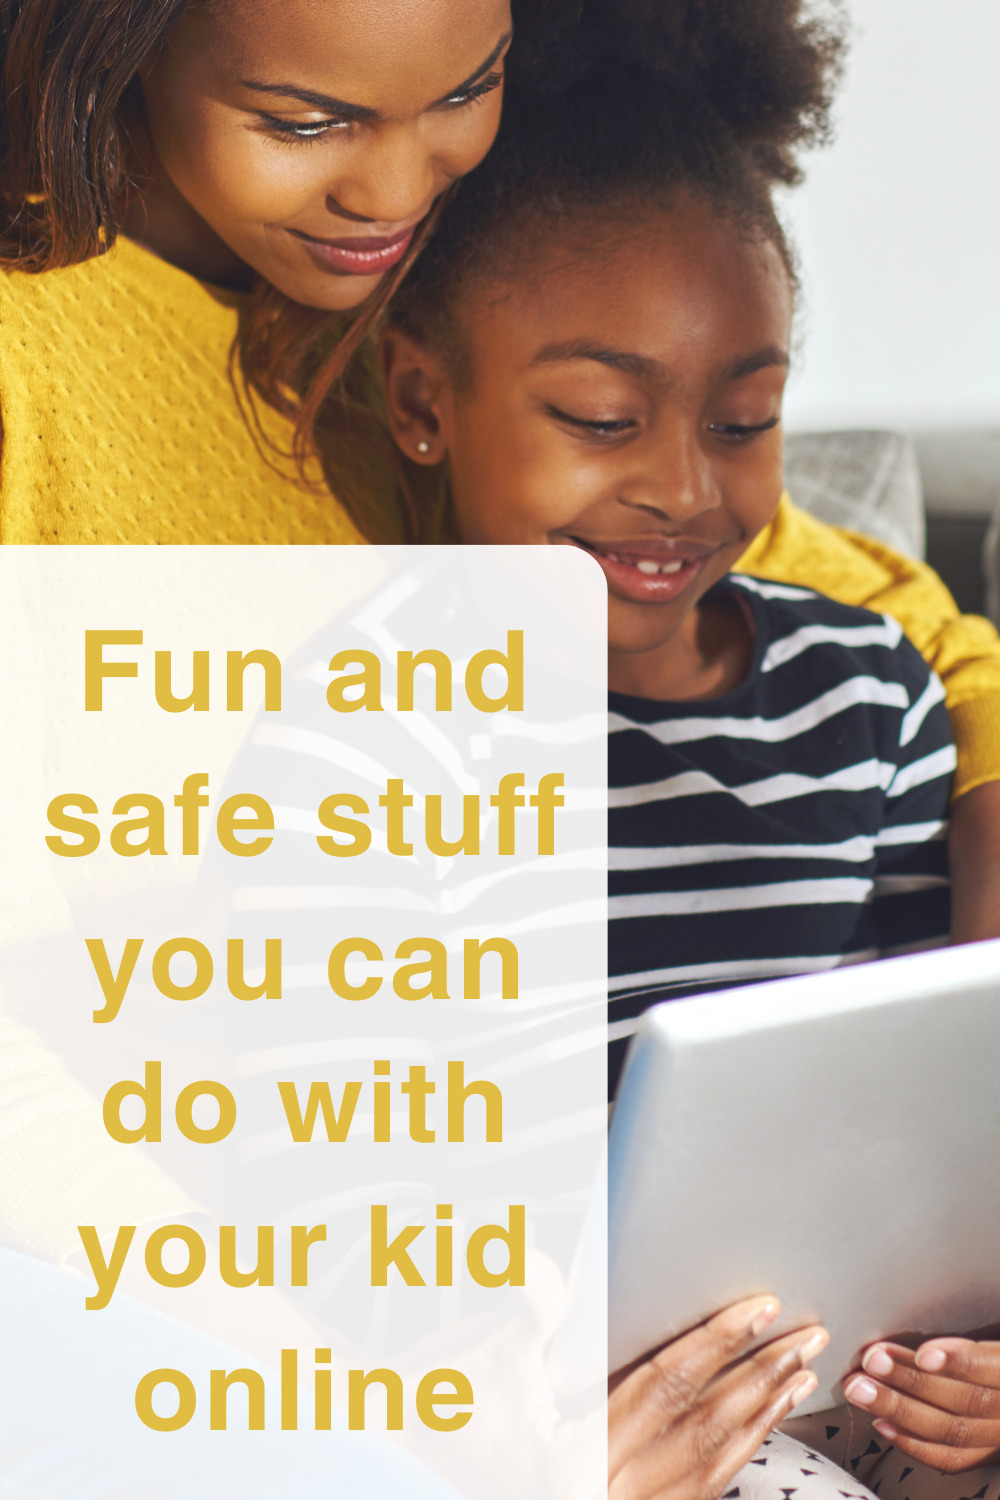 Fun and safe stuff you can do with your kid online